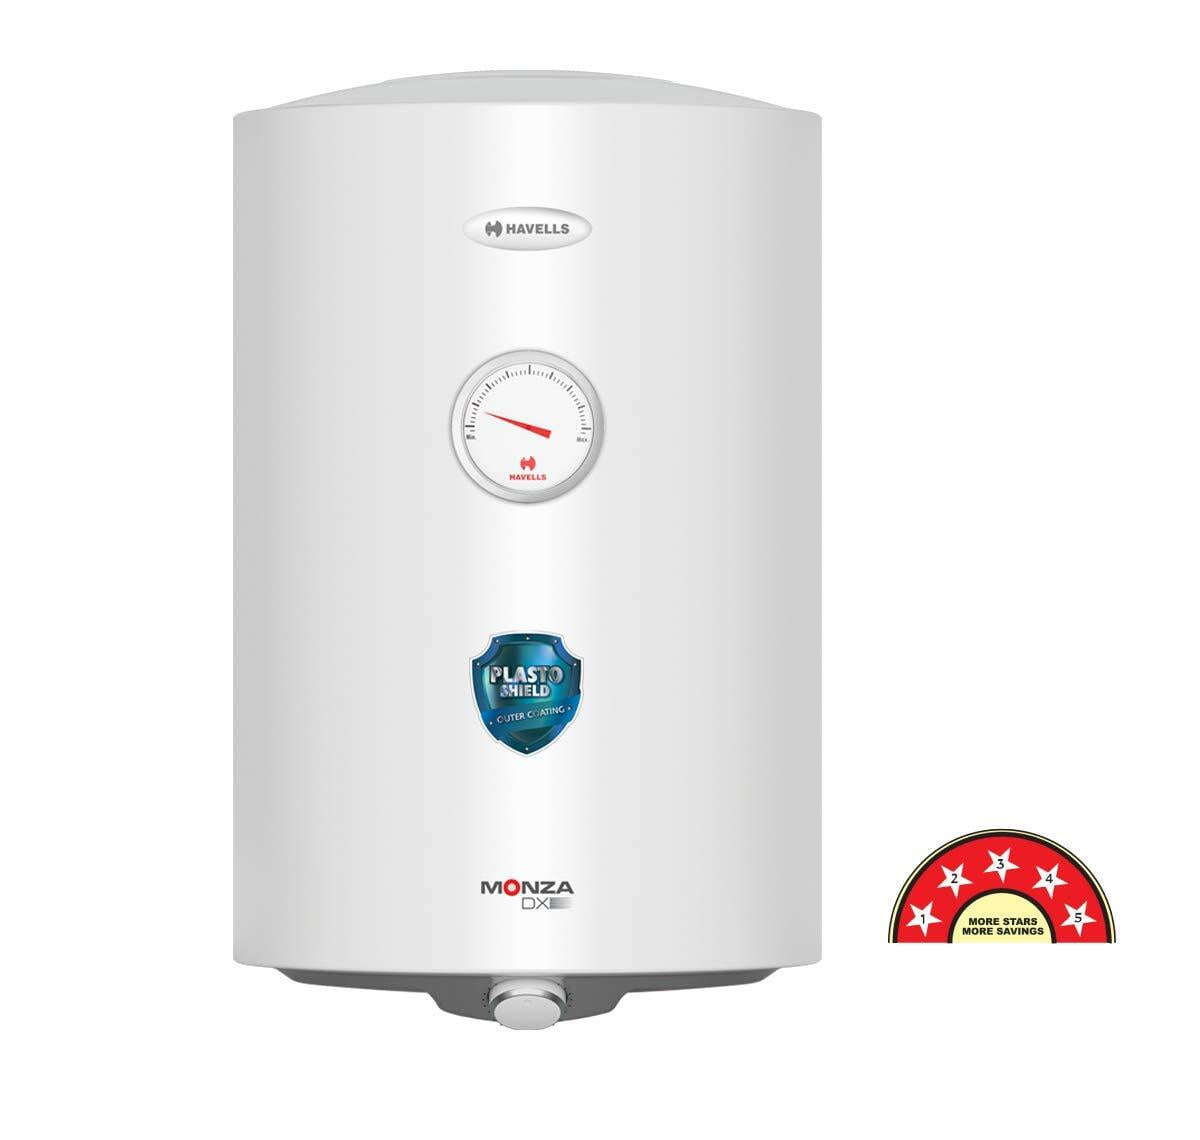 Havells Monza DX 15 Litre Storage Water Heater On Dillimall.Com